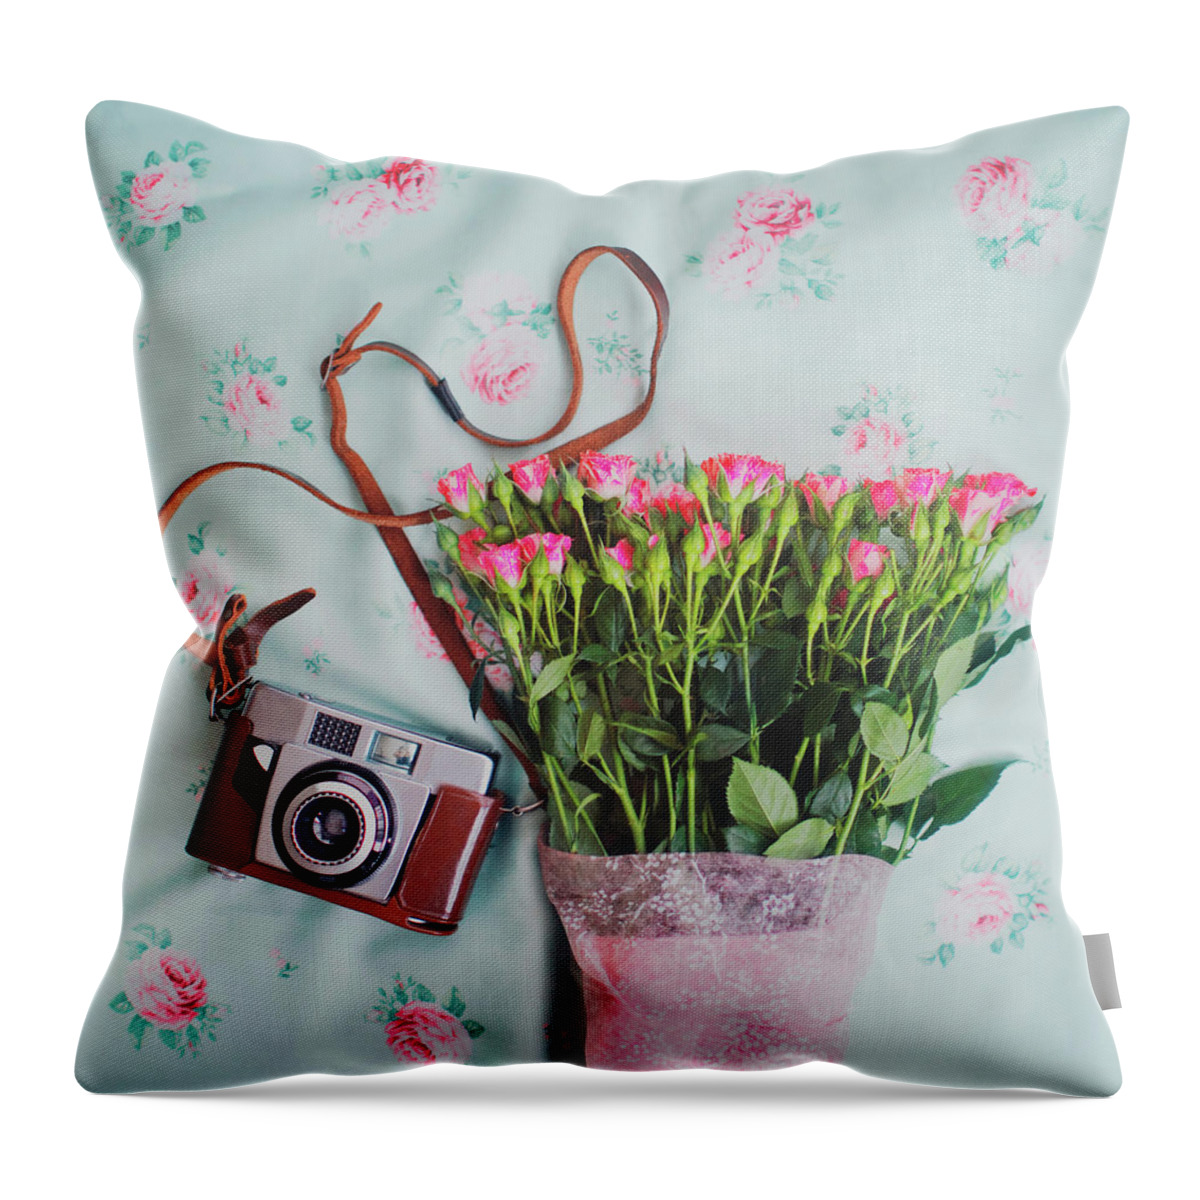 Fragility Throw Pillow featuring the photograph Flowers And A Camera by Julia Davila-lampe